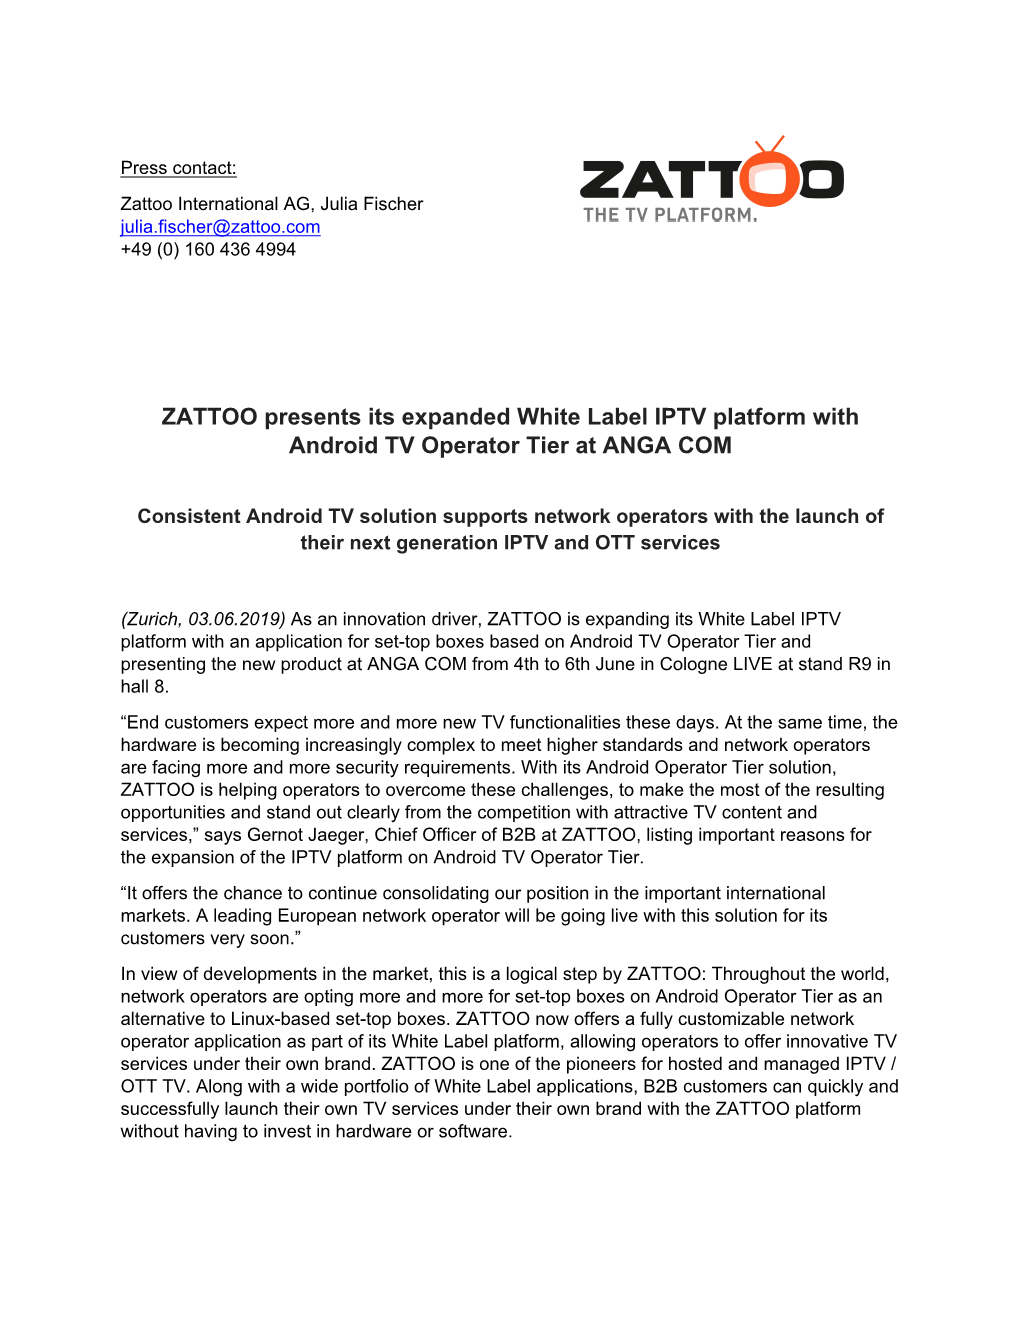 ZATTOO Presents Its Expanded White Label IPTV Platform with Android TV Operator Tier at ANGA COM